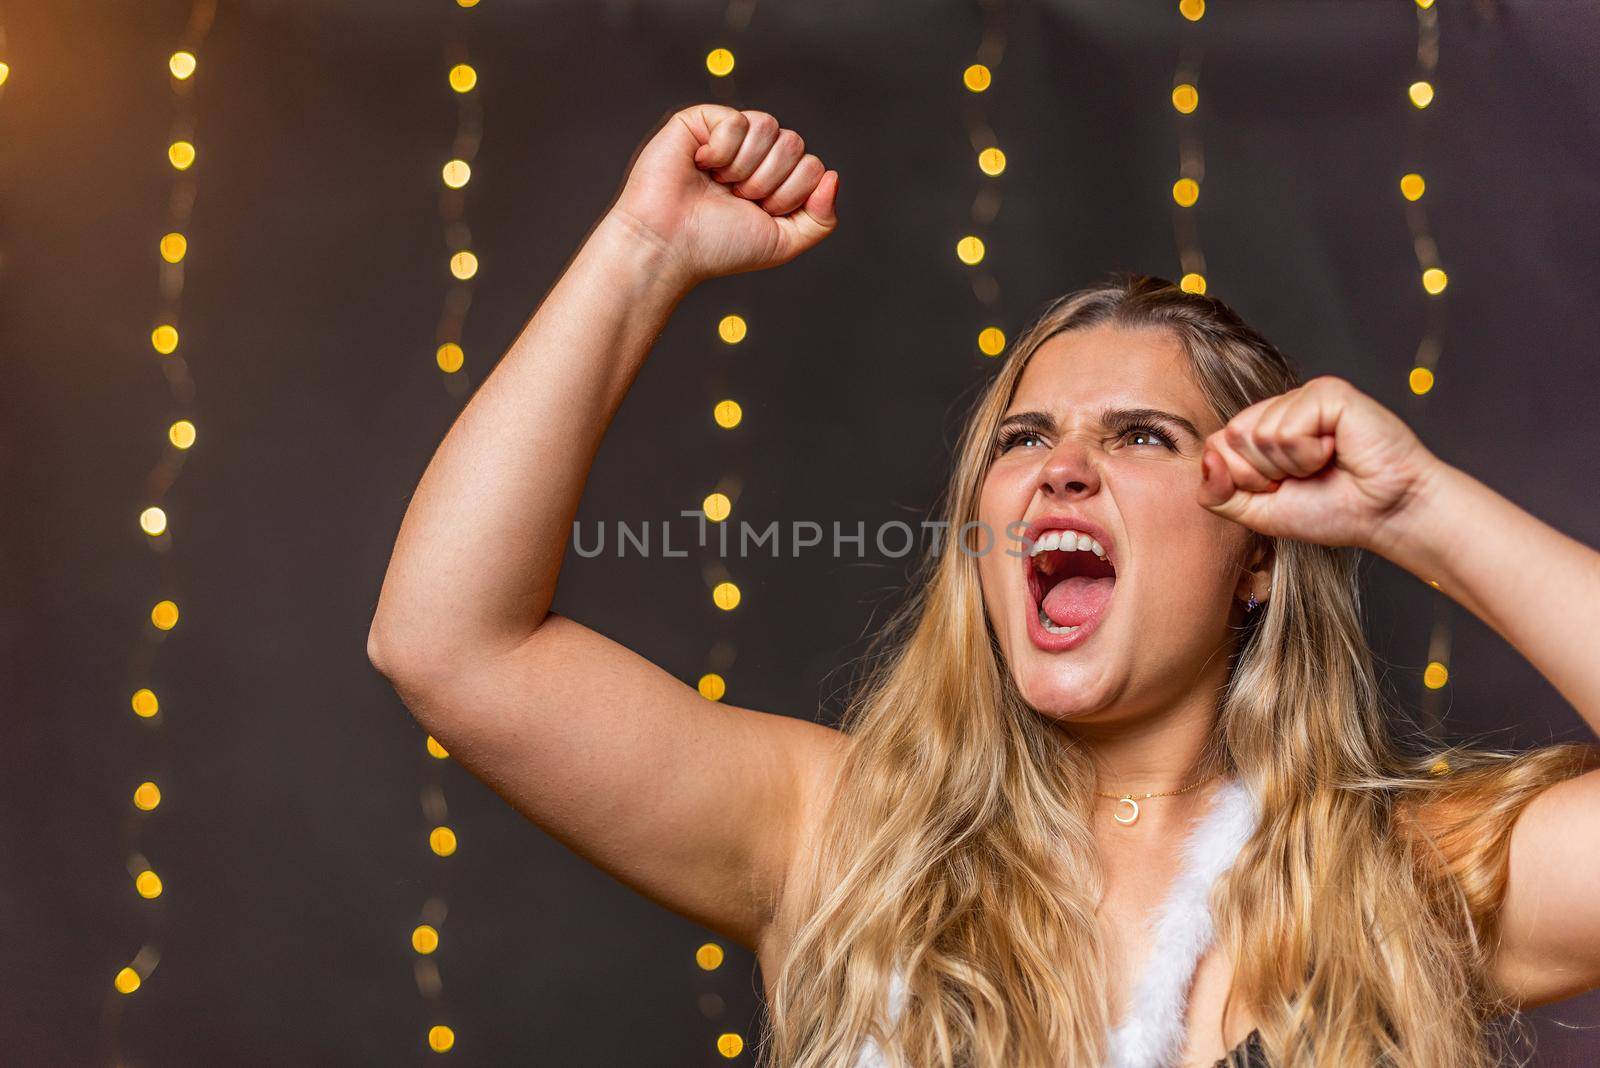 A euphoric woman screaming and raising hands with blurred background by ivanmoreno